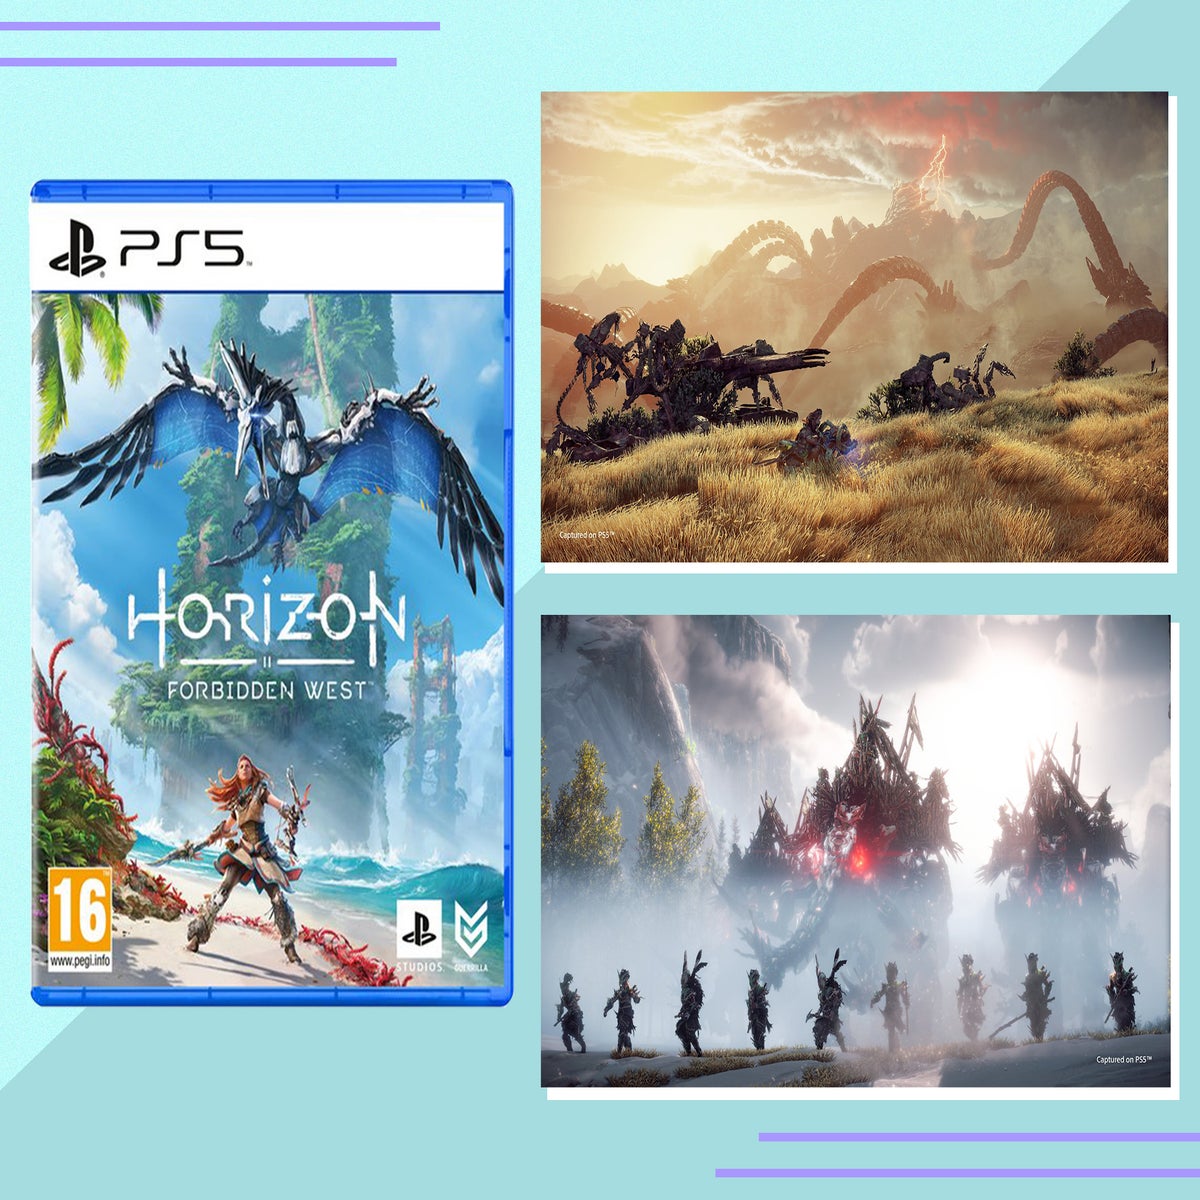 Horizon Forbidden West review: a PS5 showcase obsessed with 'more